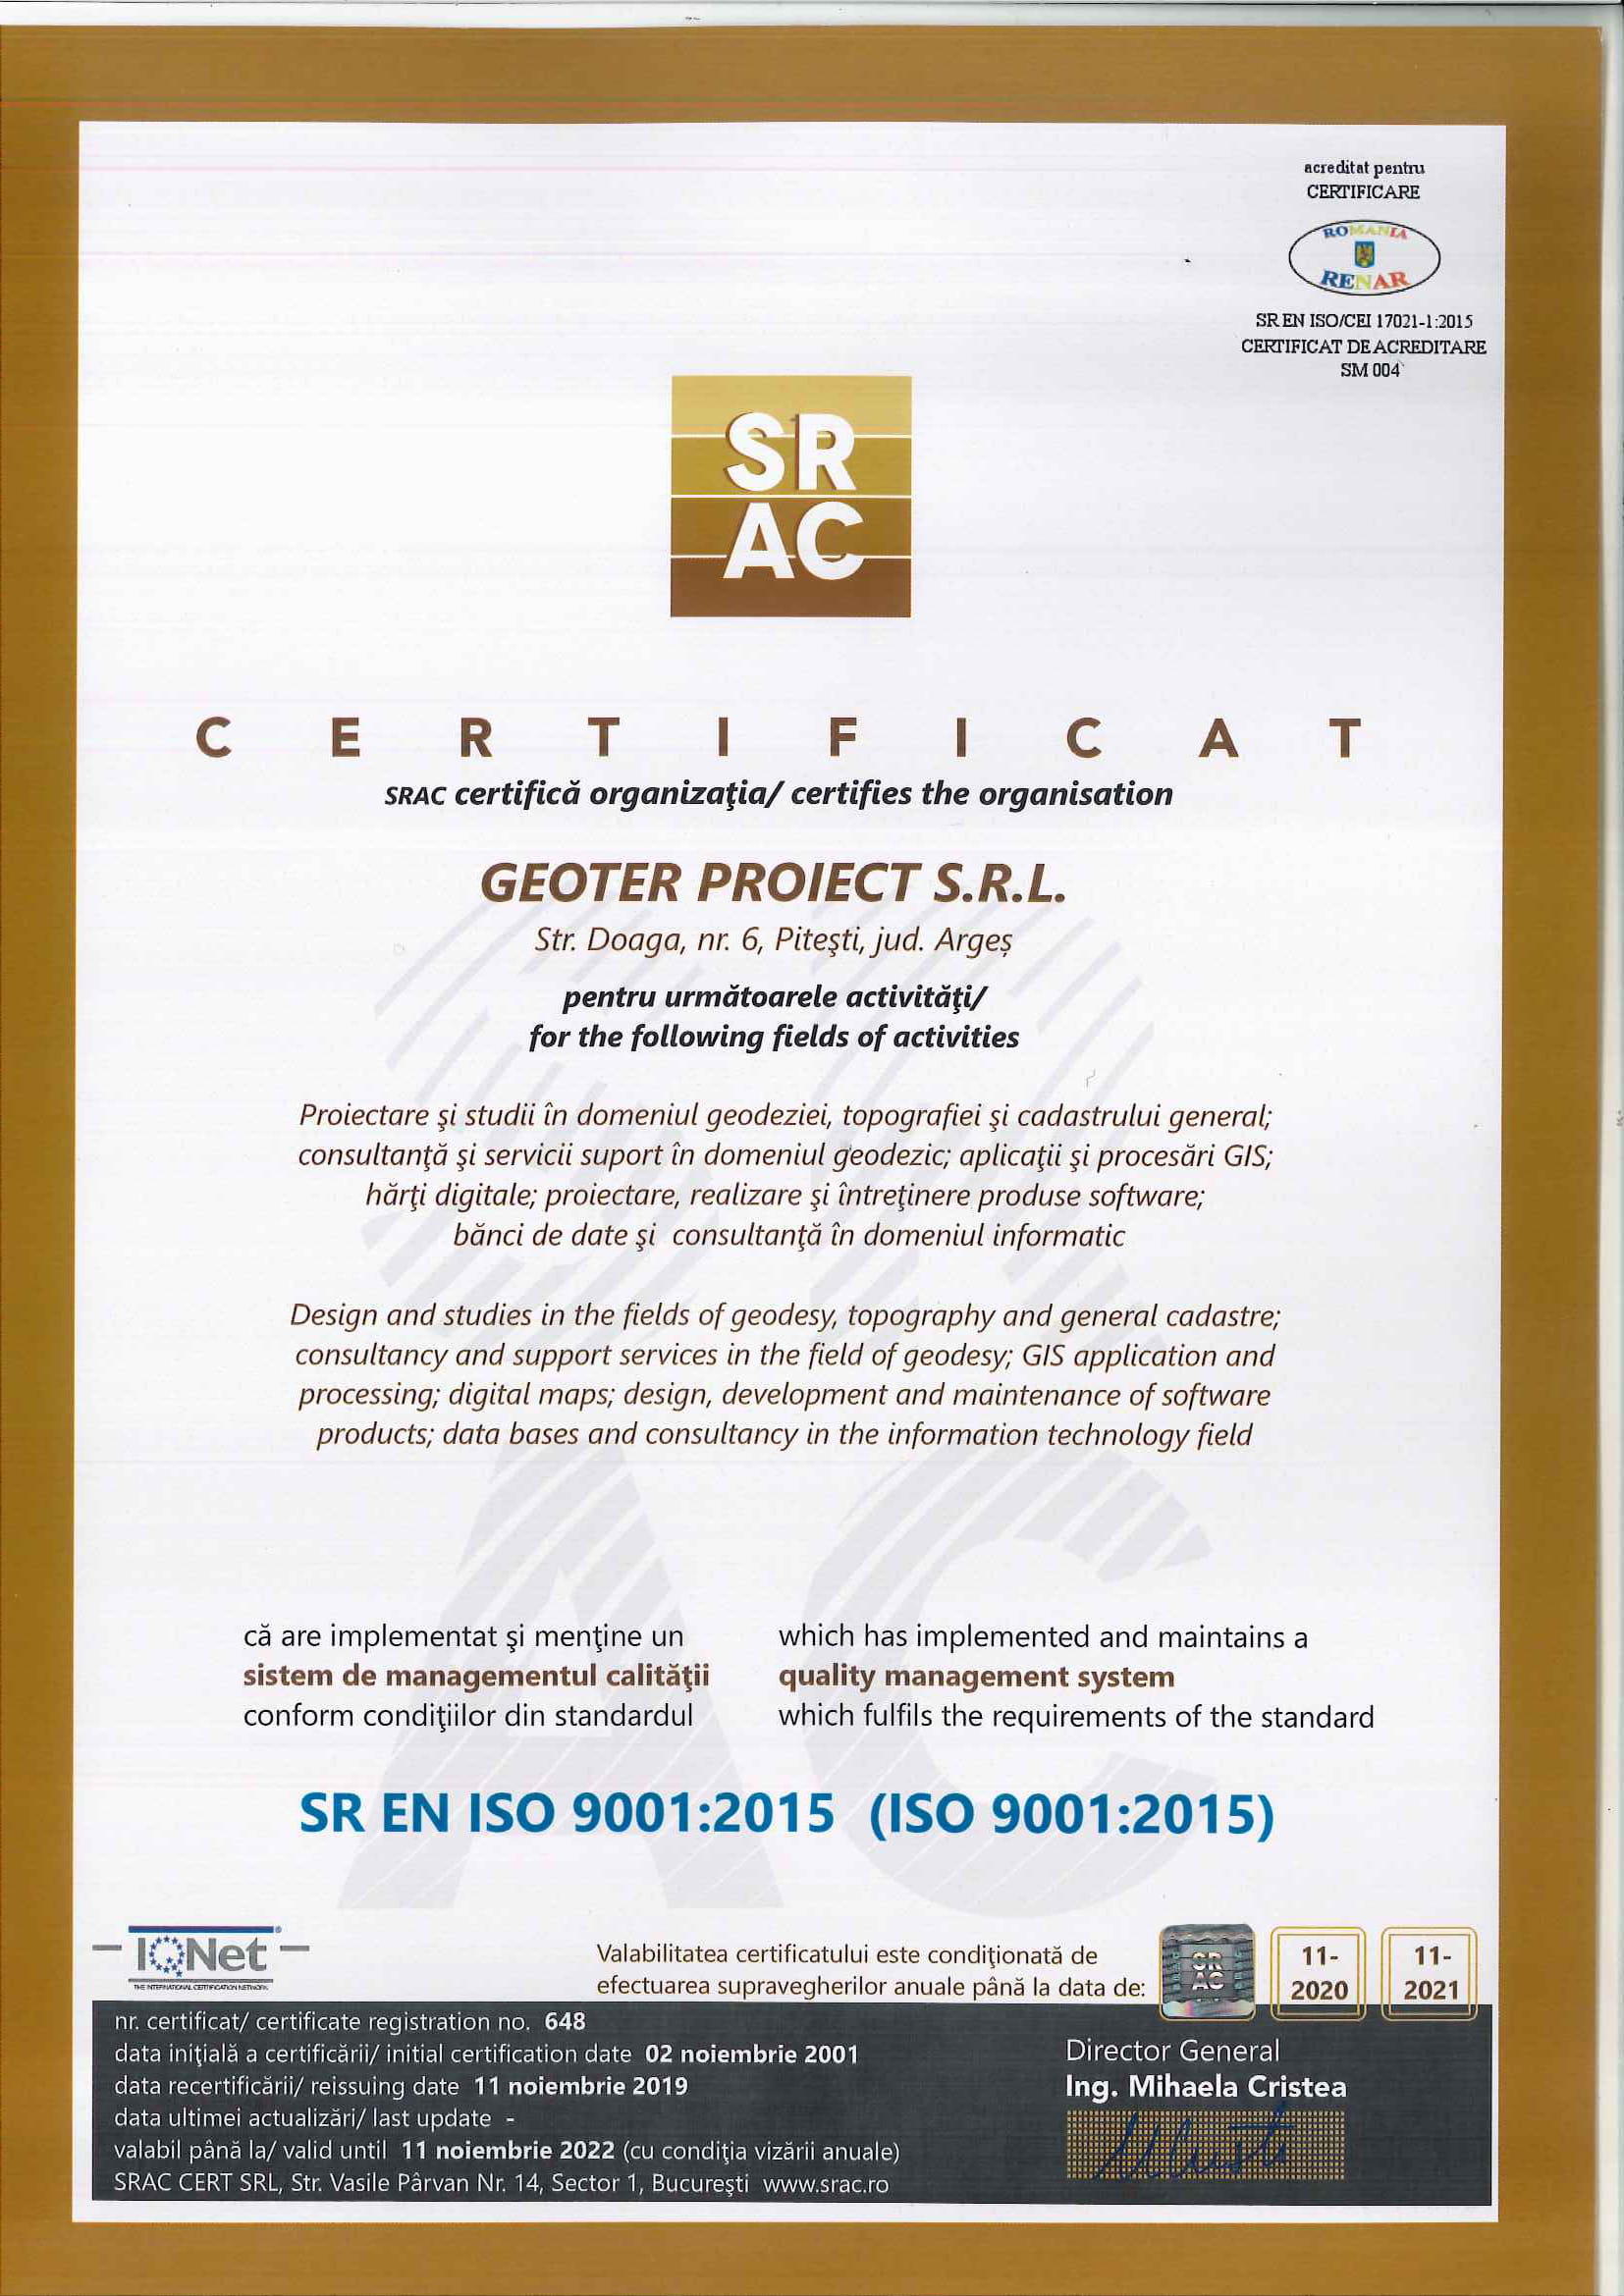 Geoter Proiect